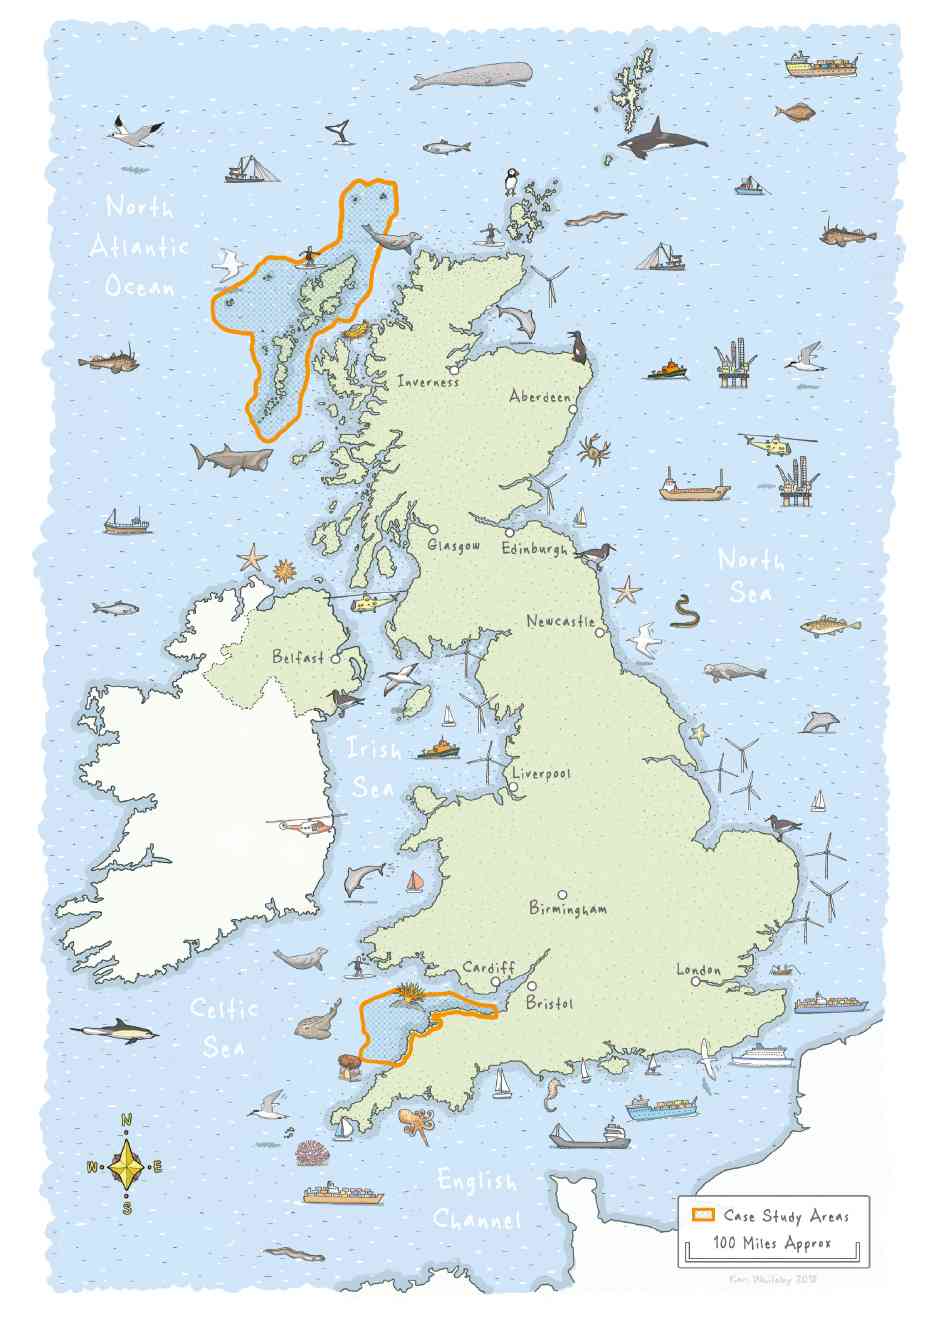 UK map showing North Dvon and Outer Hebrides Marine Protected Areas